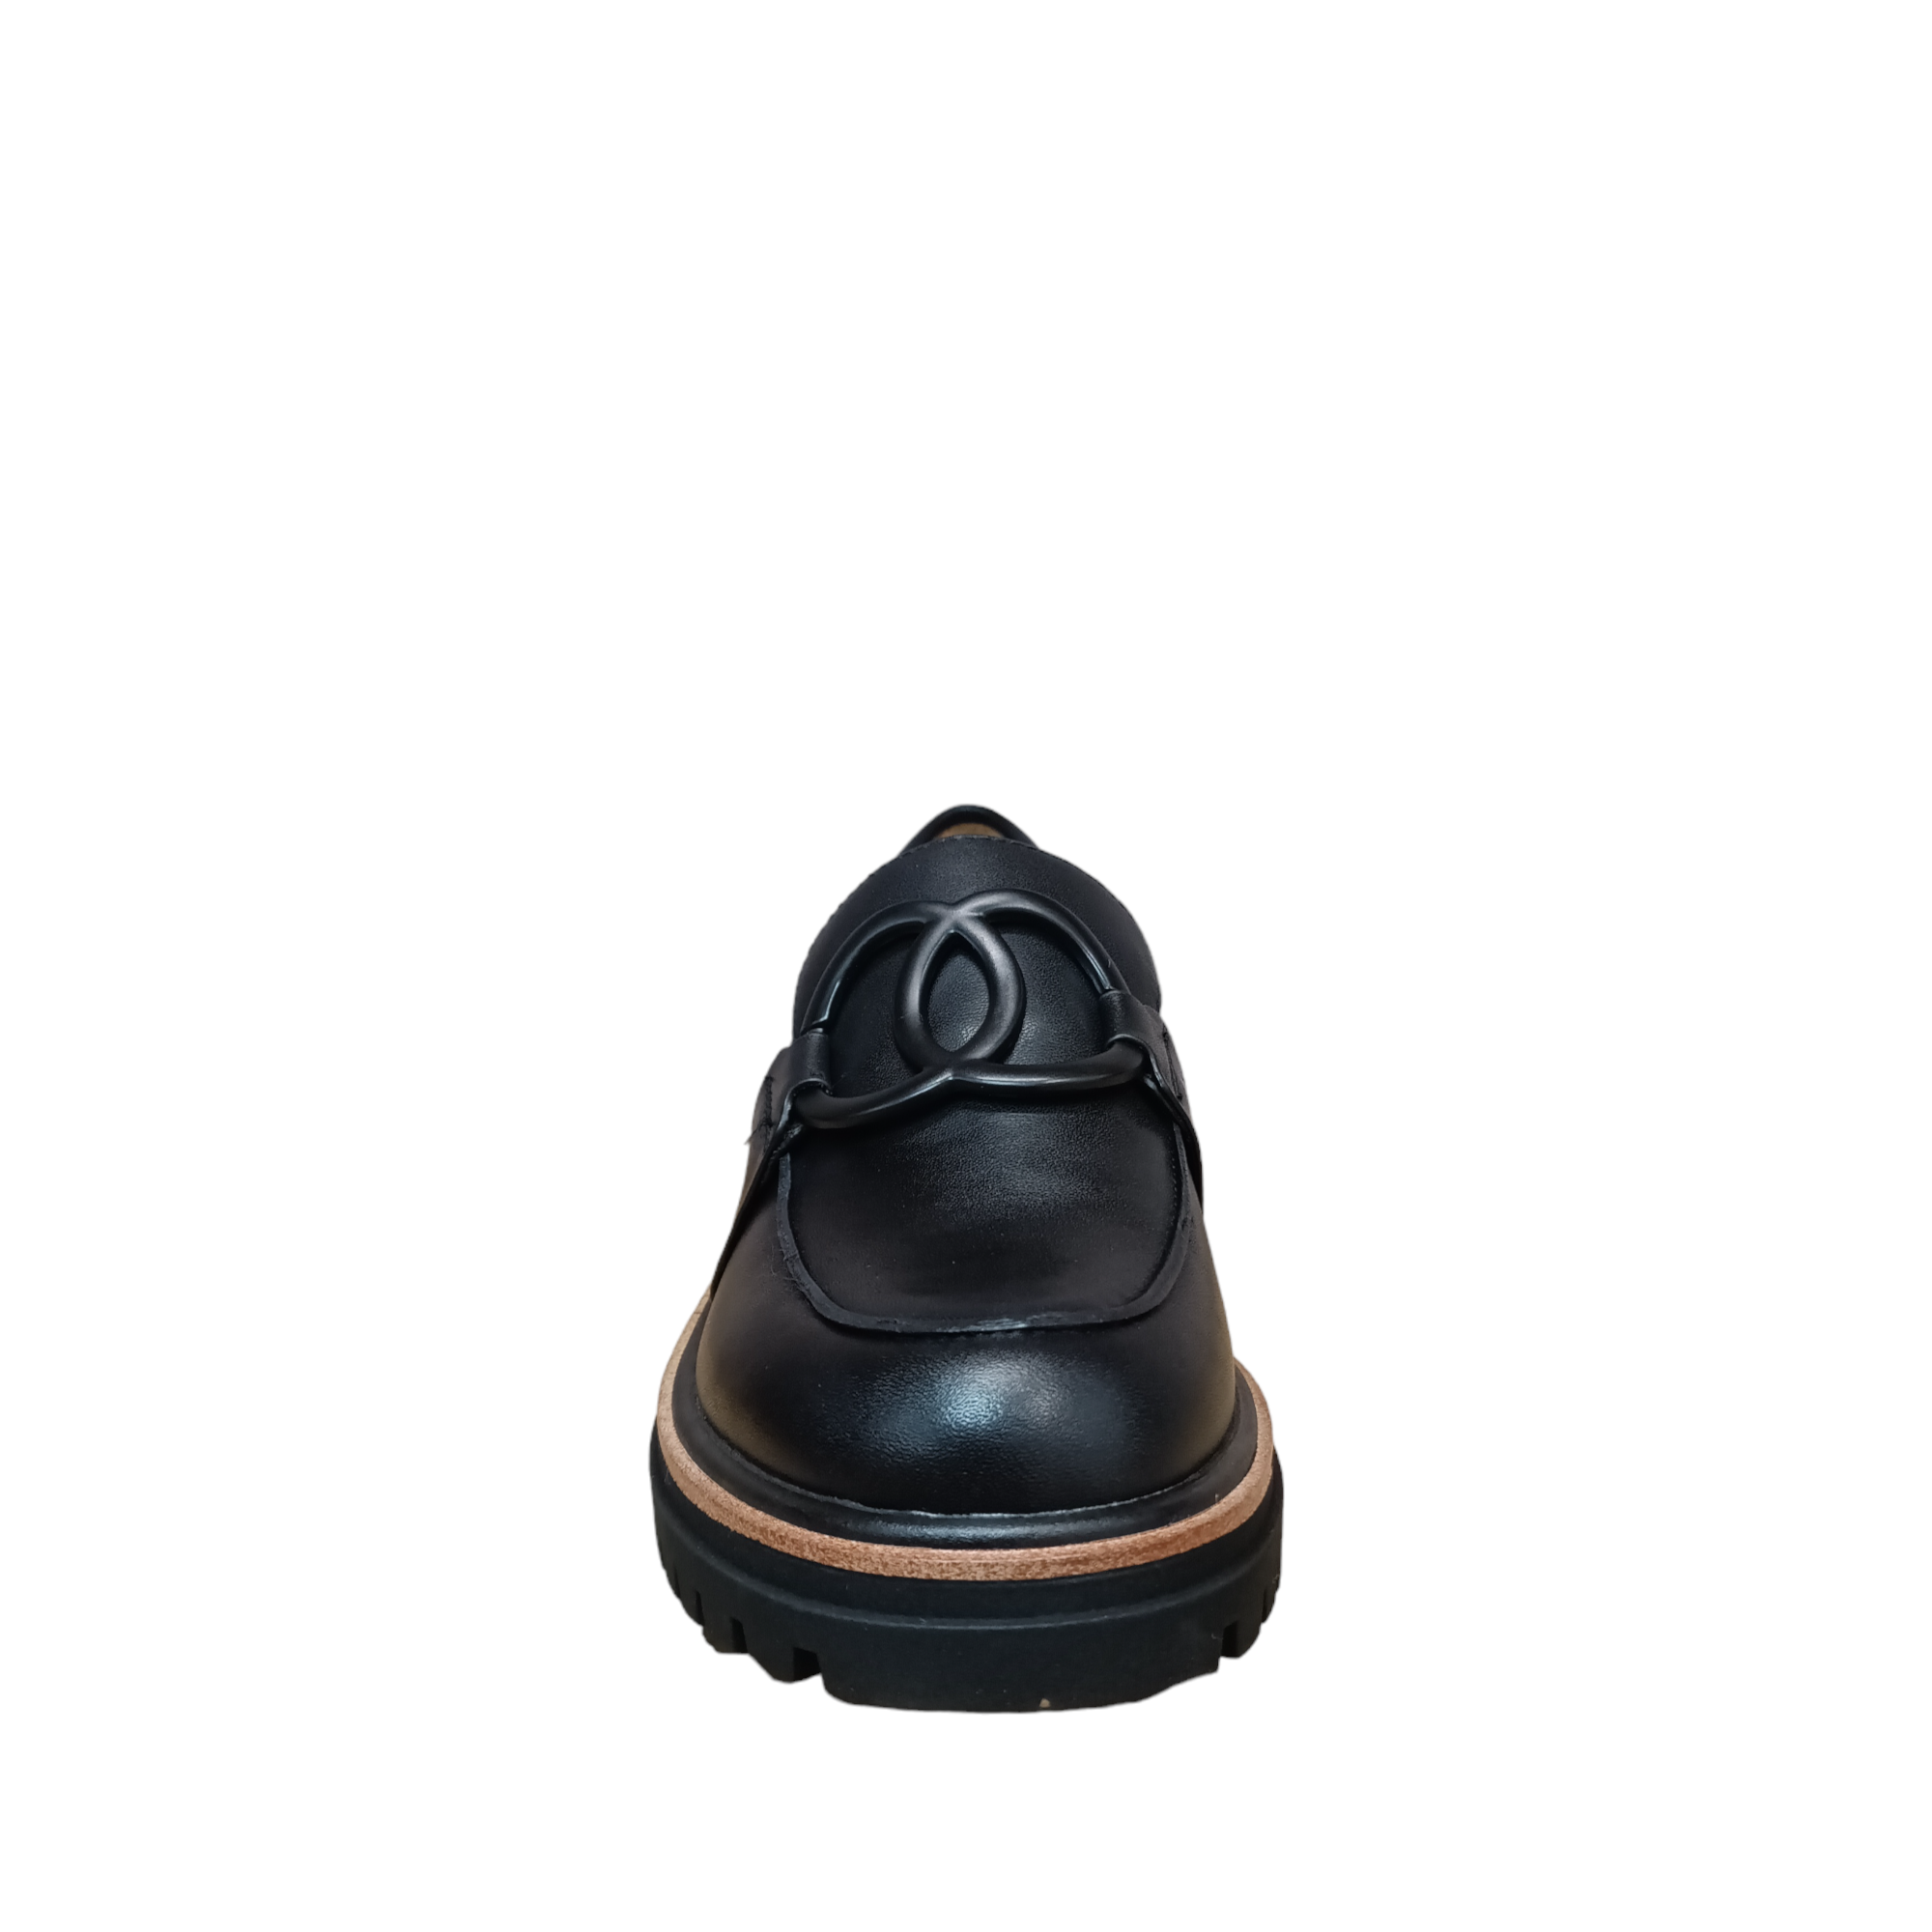 Shop Abra EOS - with shoe&amp;me - from EOS - Shoes - Shoe, Winter, Womens - [collection]